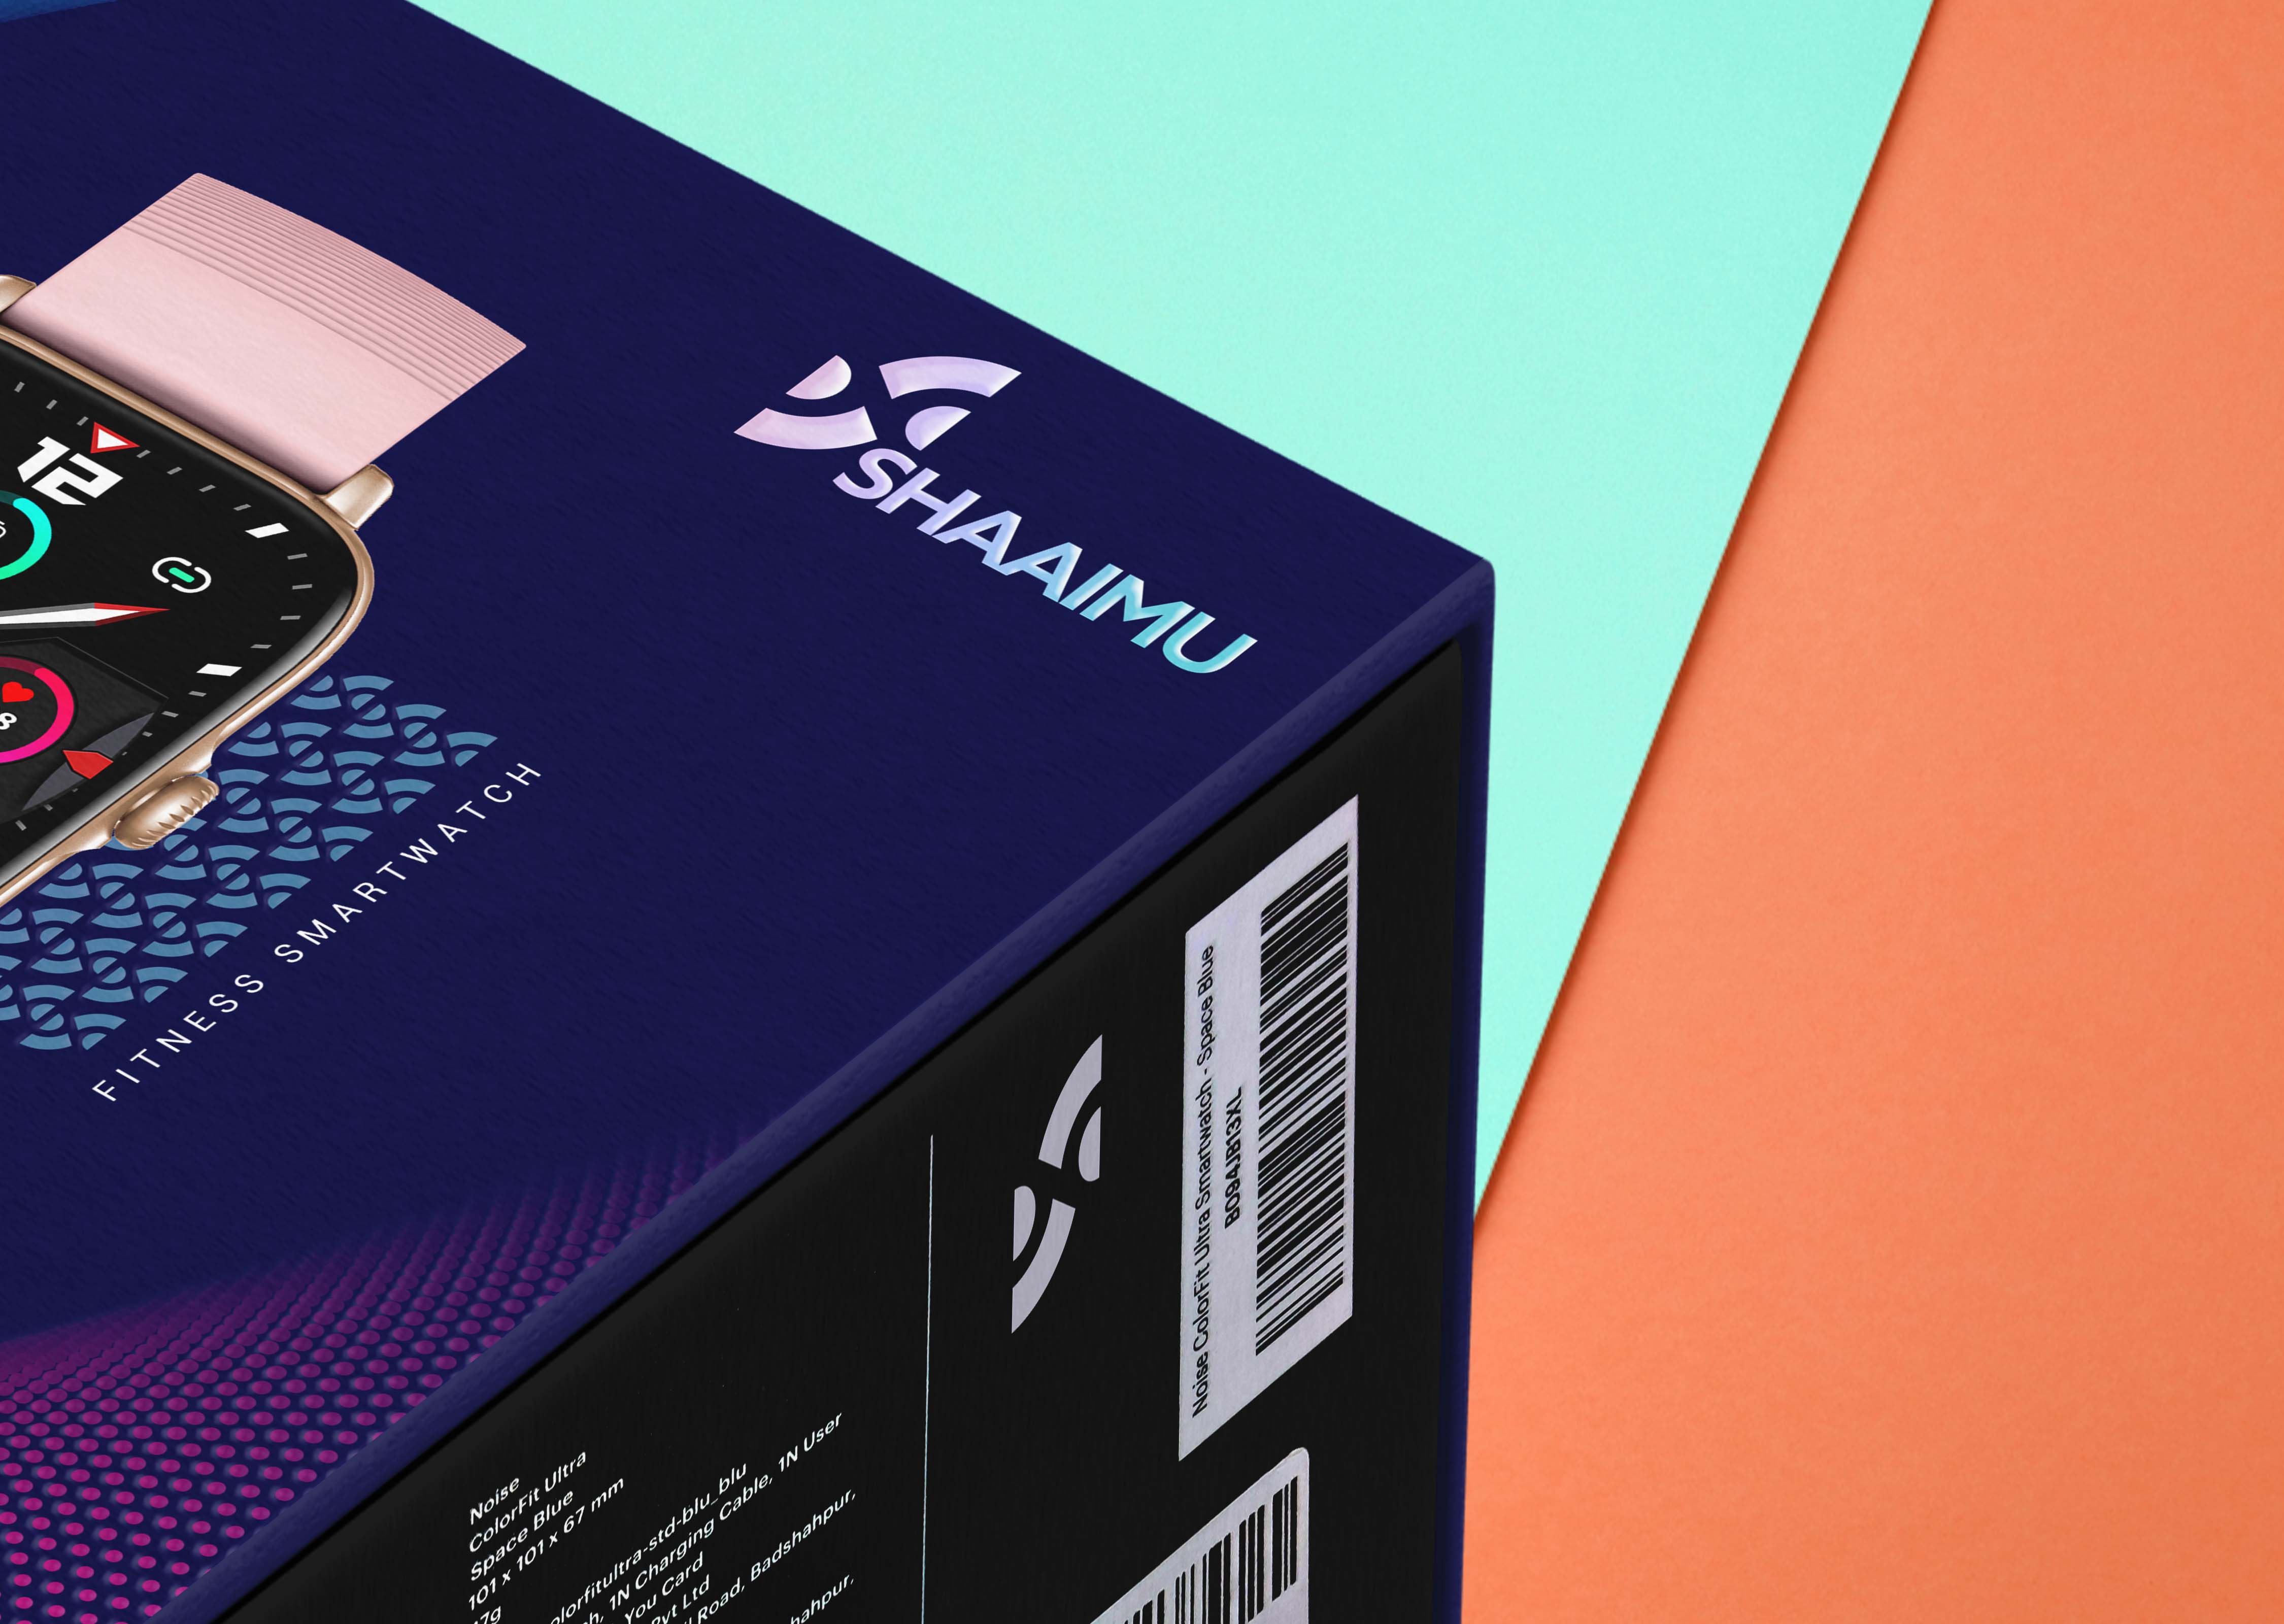 Branding And Packaging Design Of Shaaimu Smart Watches